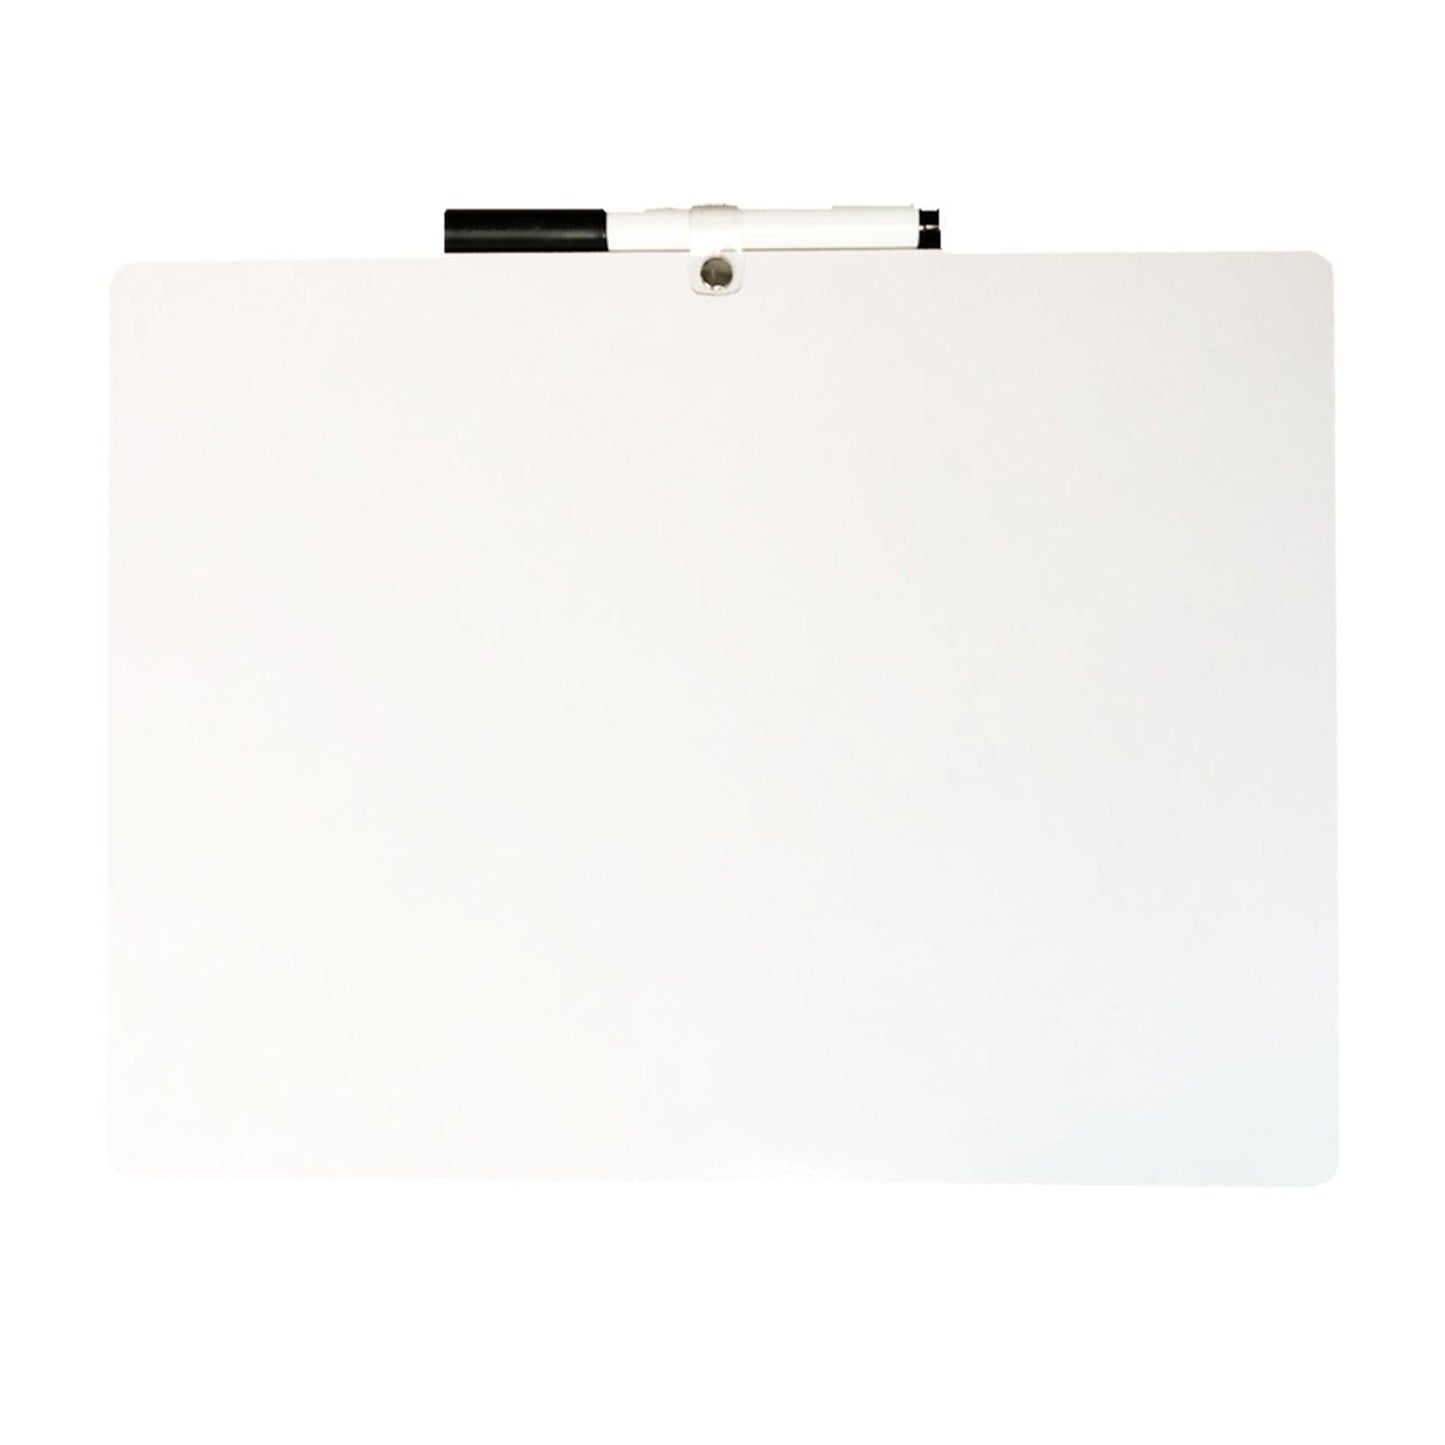 Two-Sided Primary Ruled/Blank Dry Erase Board with Attached Marker, 9" x 12", Pack of 3 - Loomini